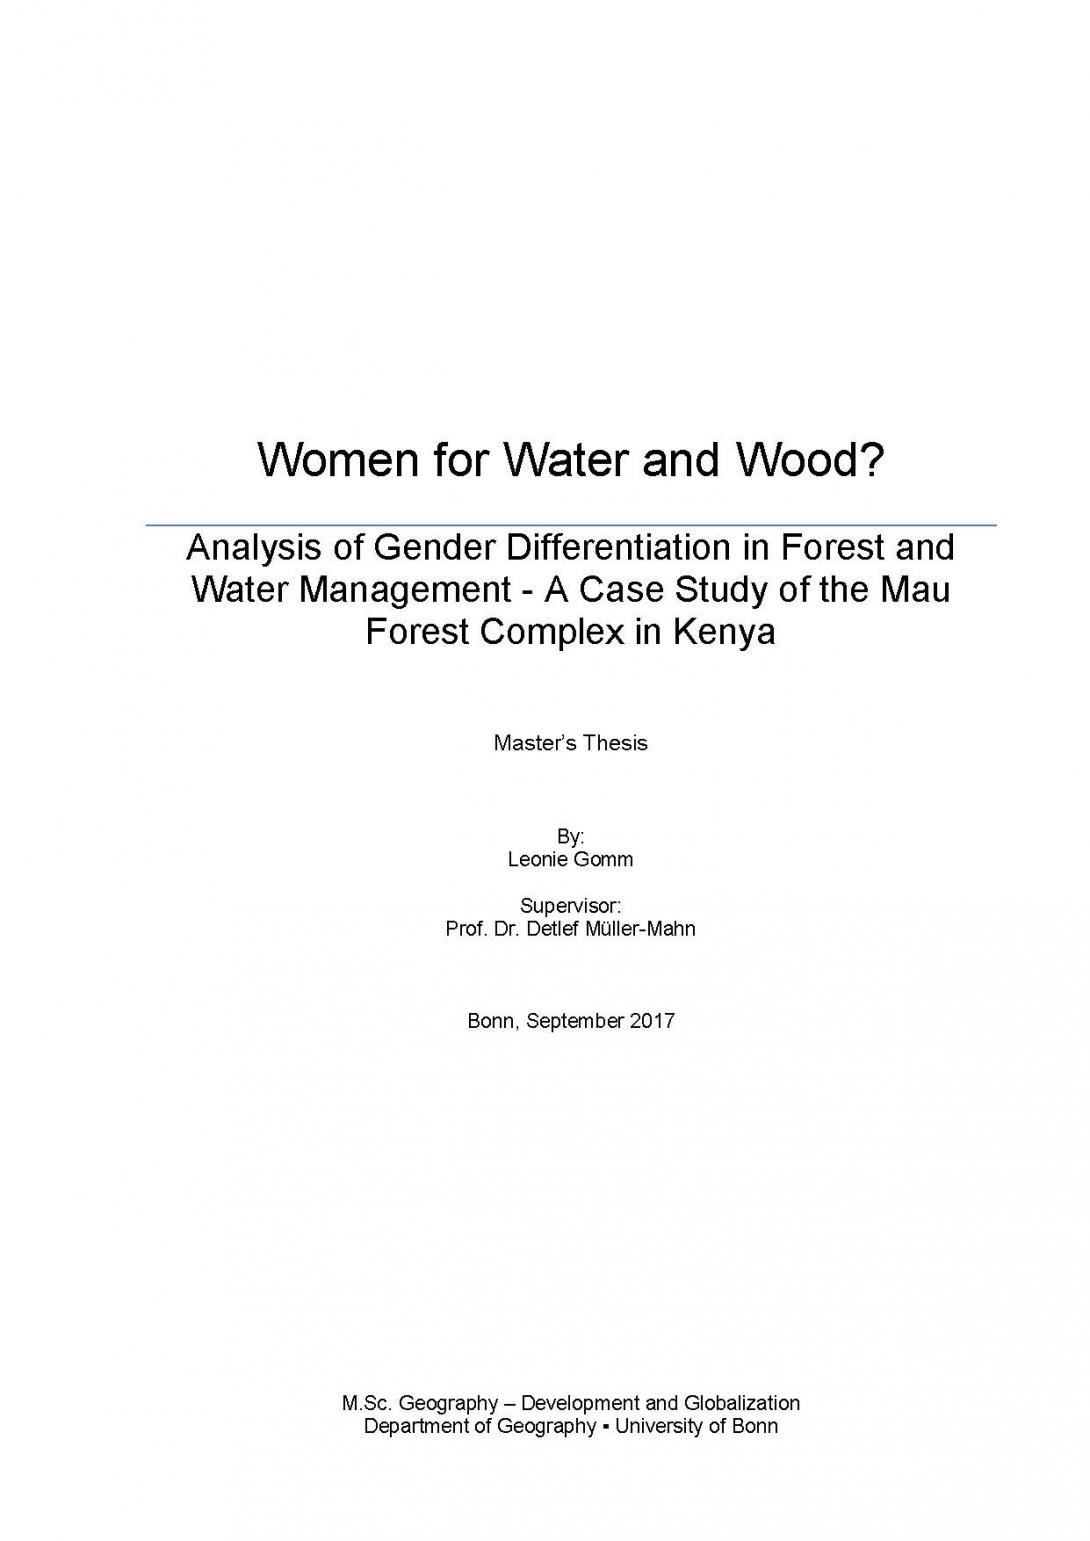 Women for Water and Wood?: Analysis of Gender Differentiation in Forest and Water Management &#8211; A Case Study of the Mau Forest Complex in Kenya